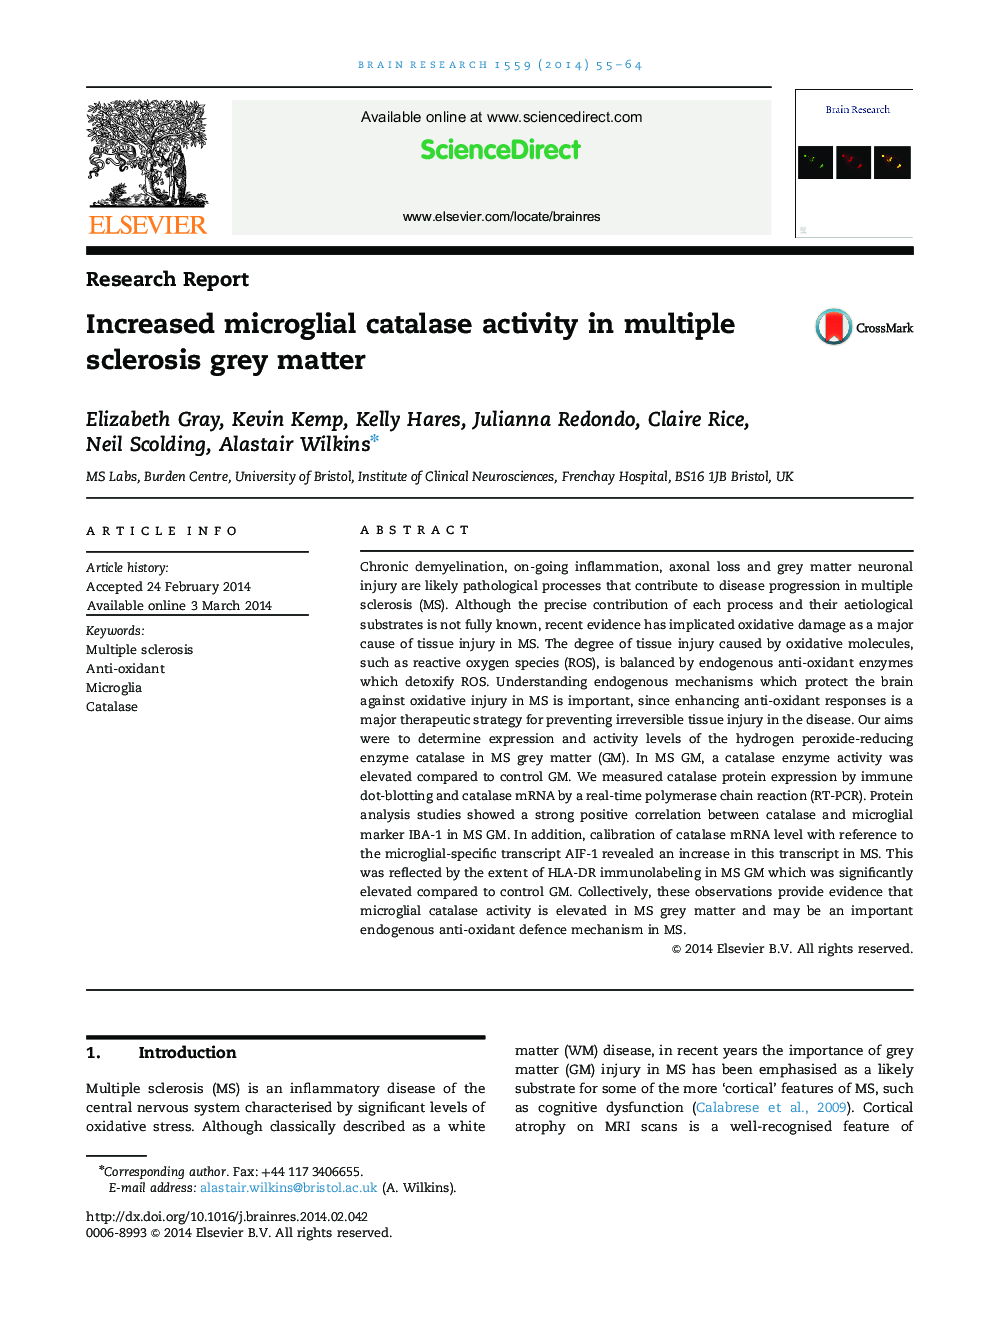 Increased microglial catalase activity in multiple sclerosis grey matter